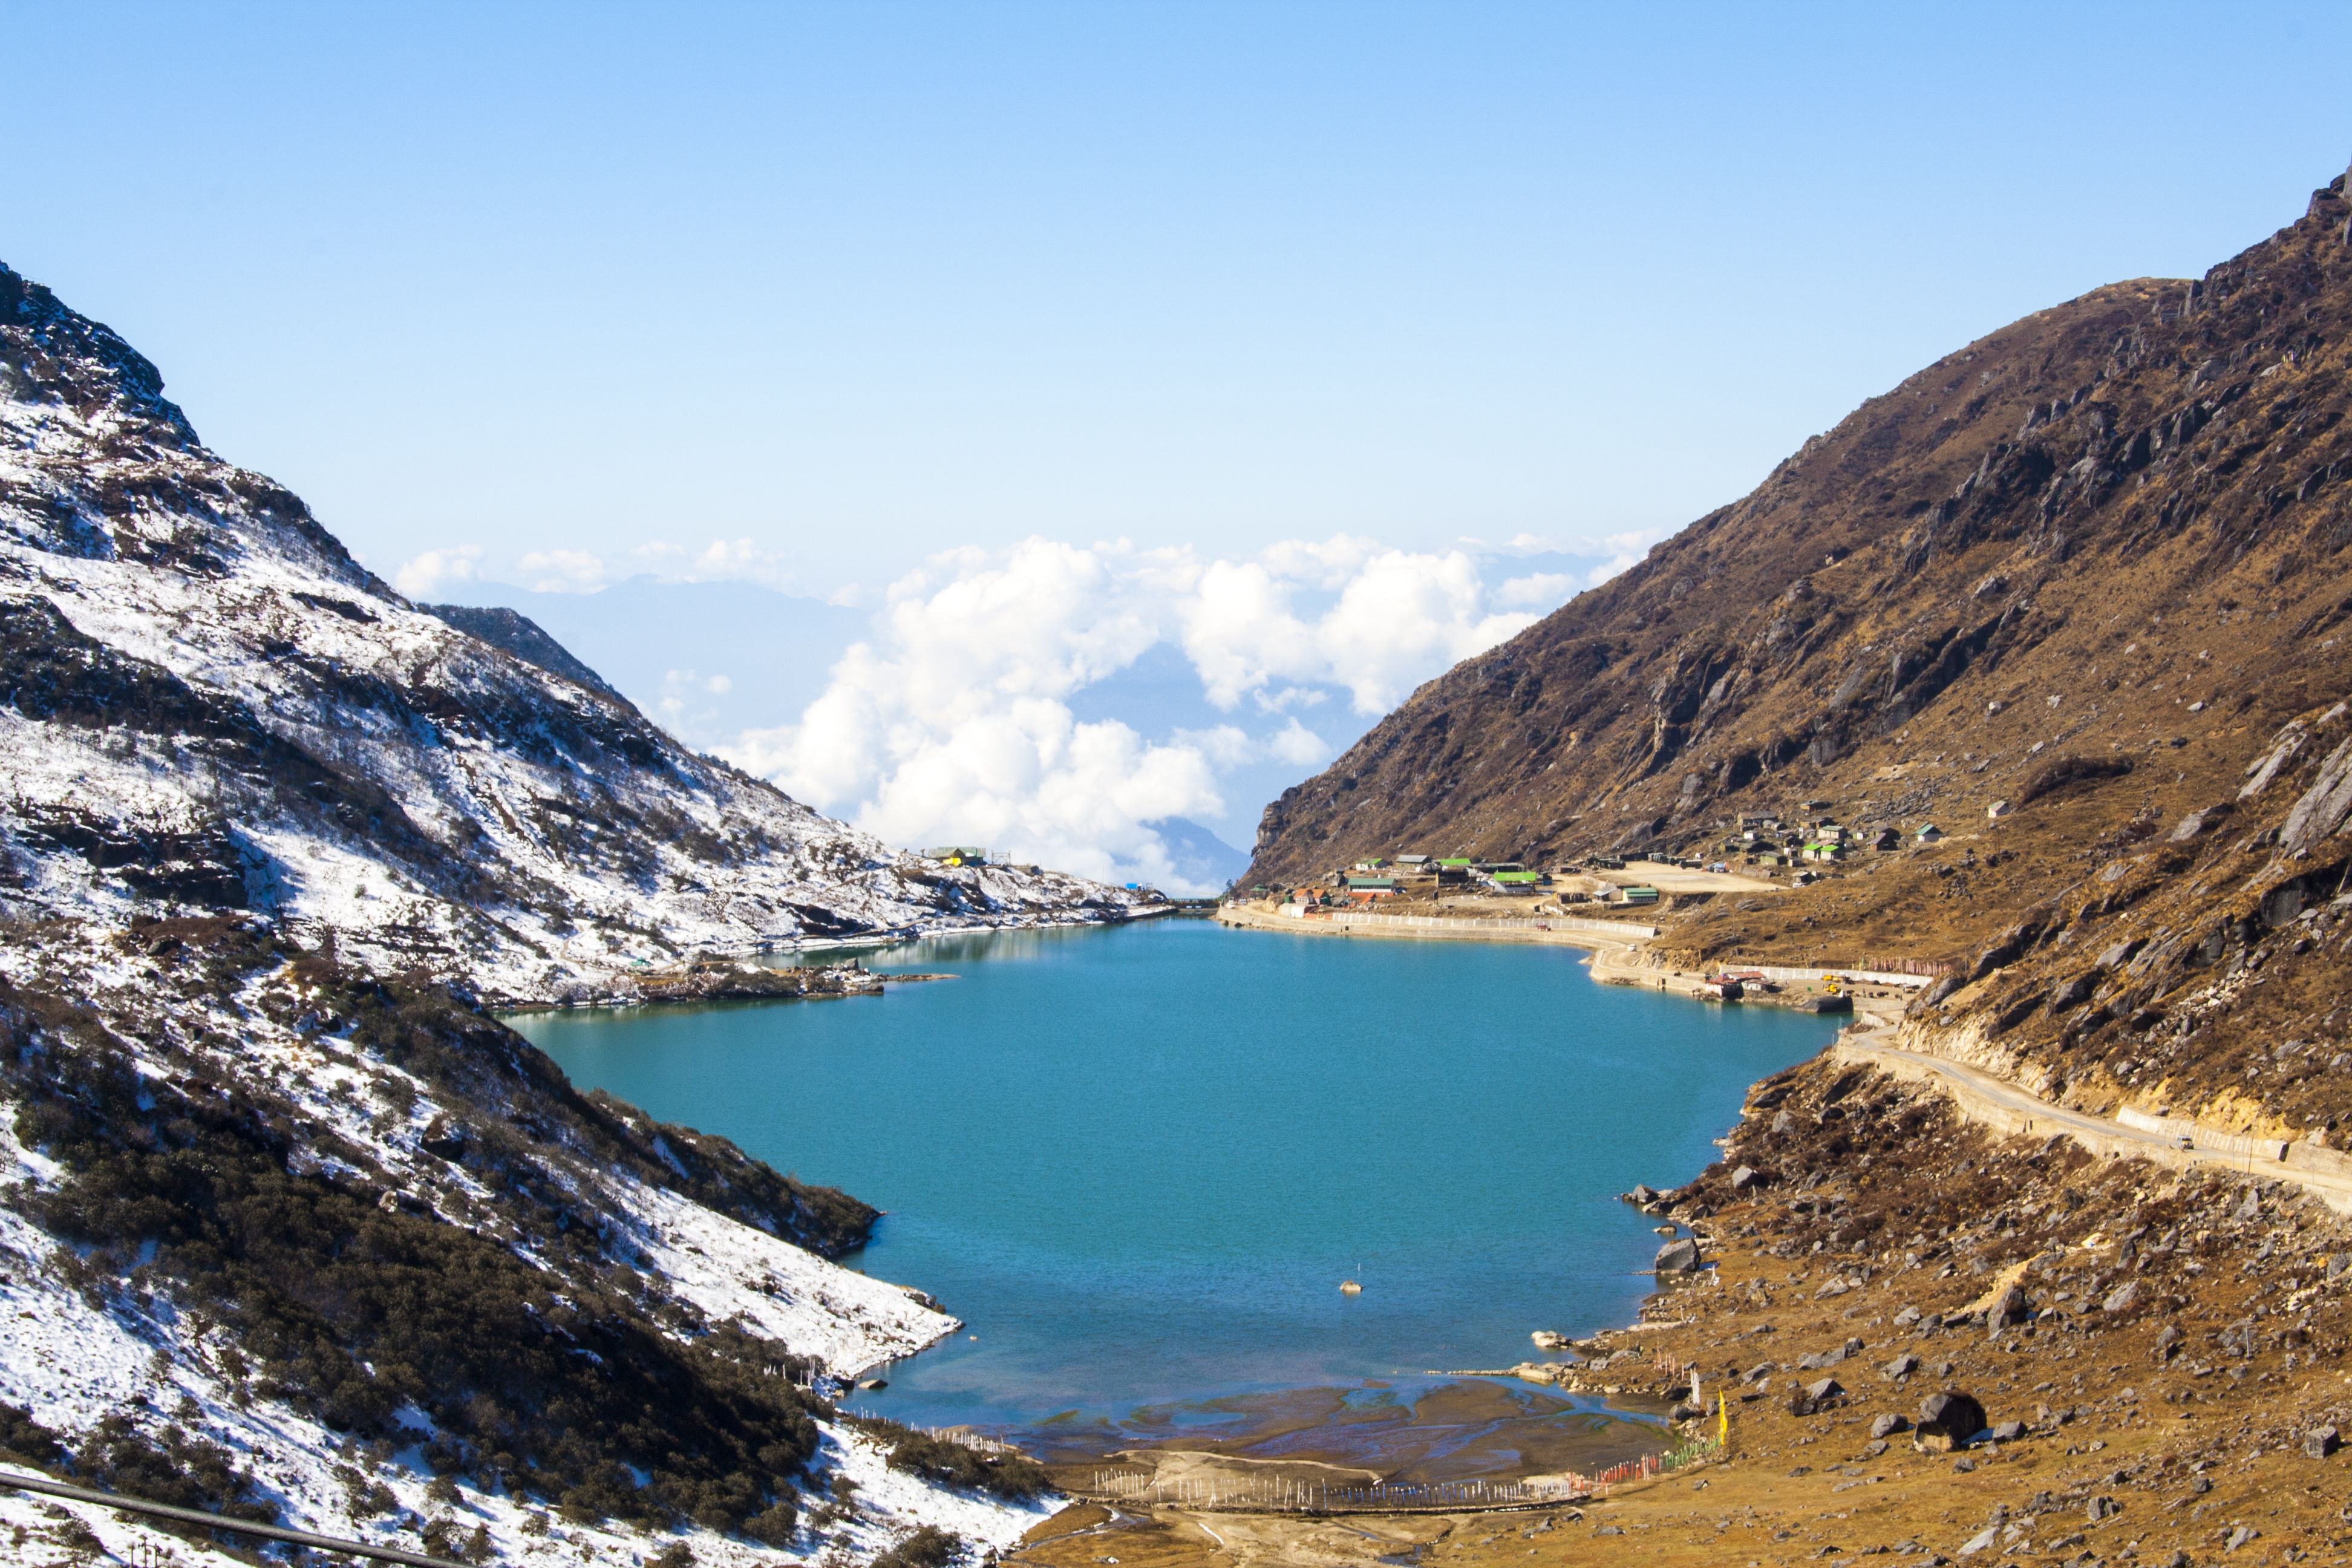 4 Things to do in Sikkim for an amazing experience